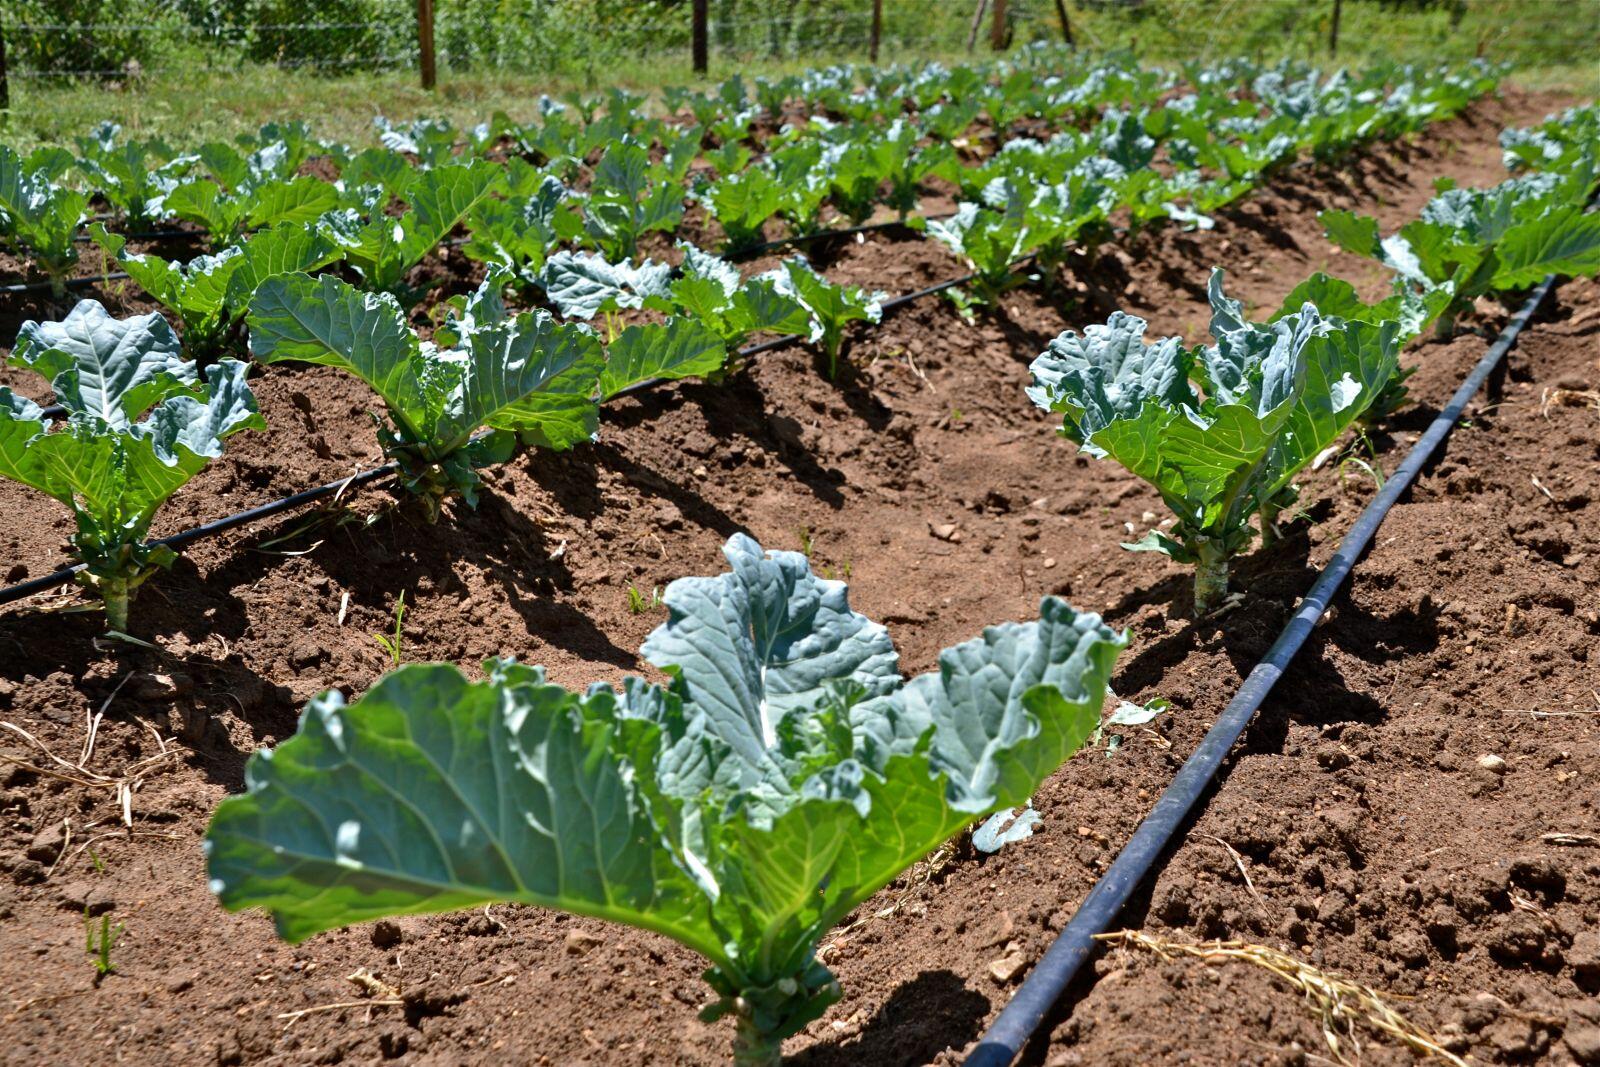 Micro irrigation tubing being used on a farm